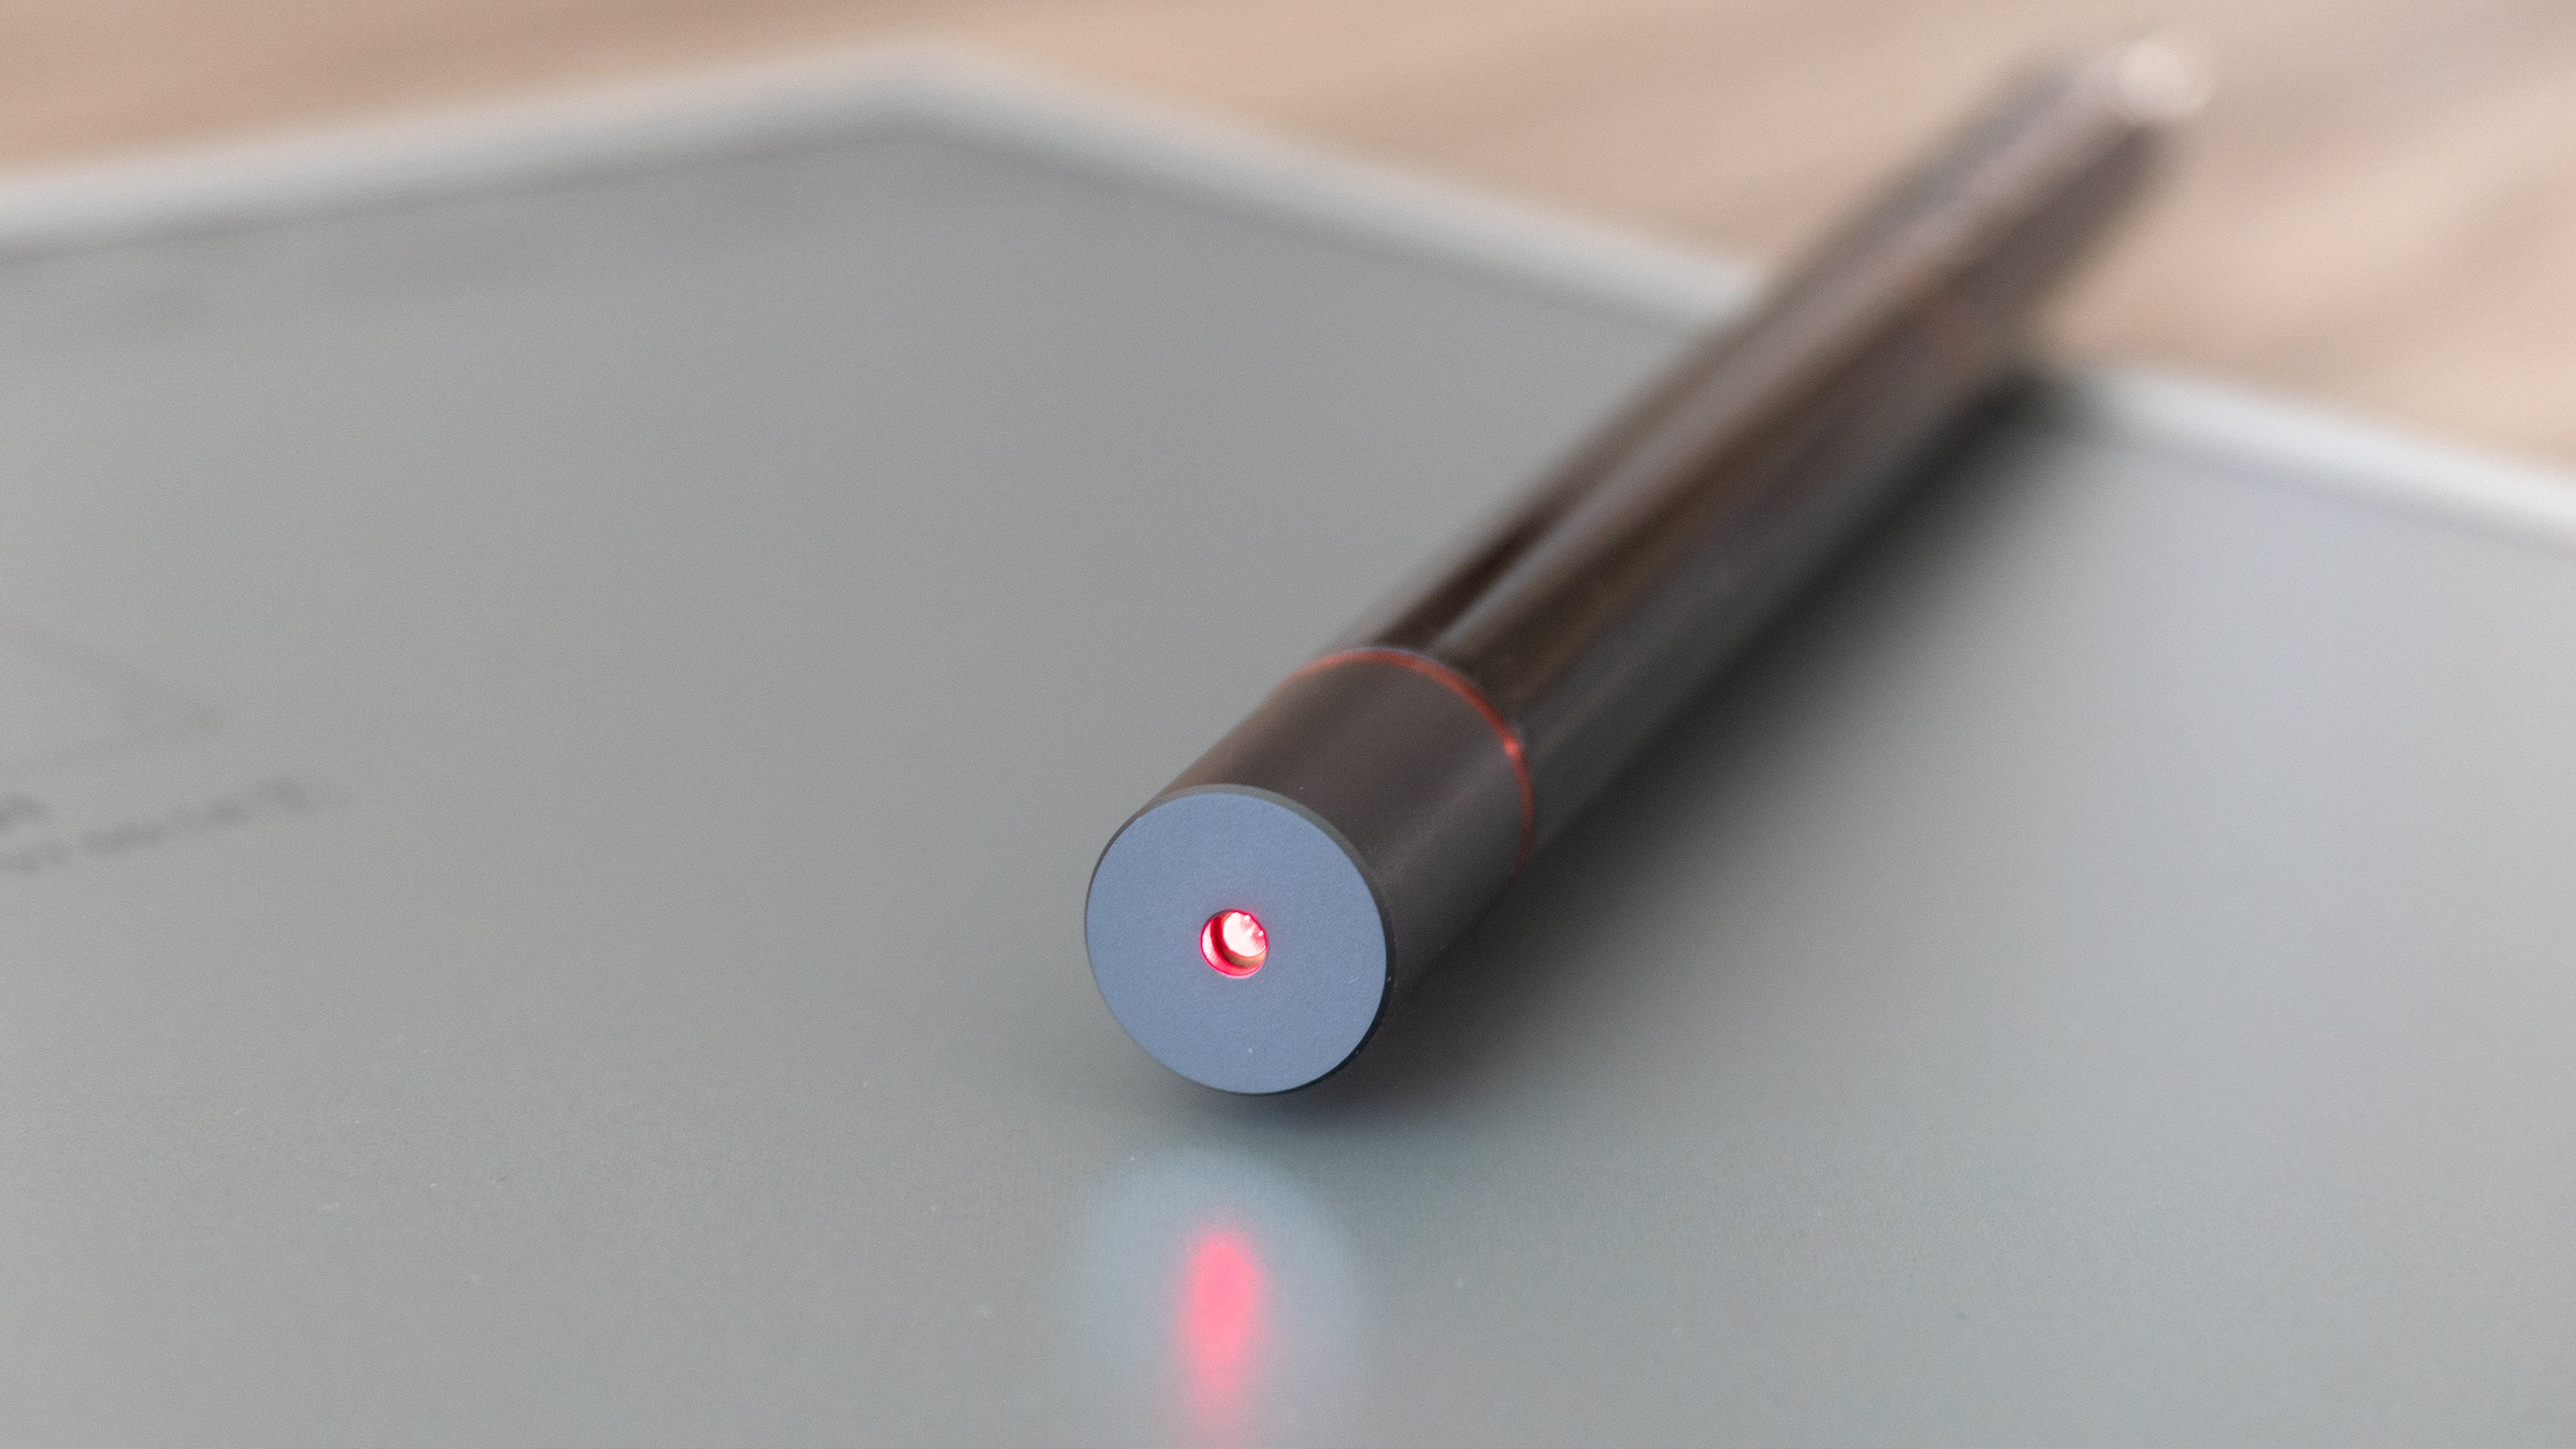 The A5 stylus even includes a laser pointer on the end, although we would have preferred an eraser tool. (Photo: Andrew Liszewski | Gizmodo)